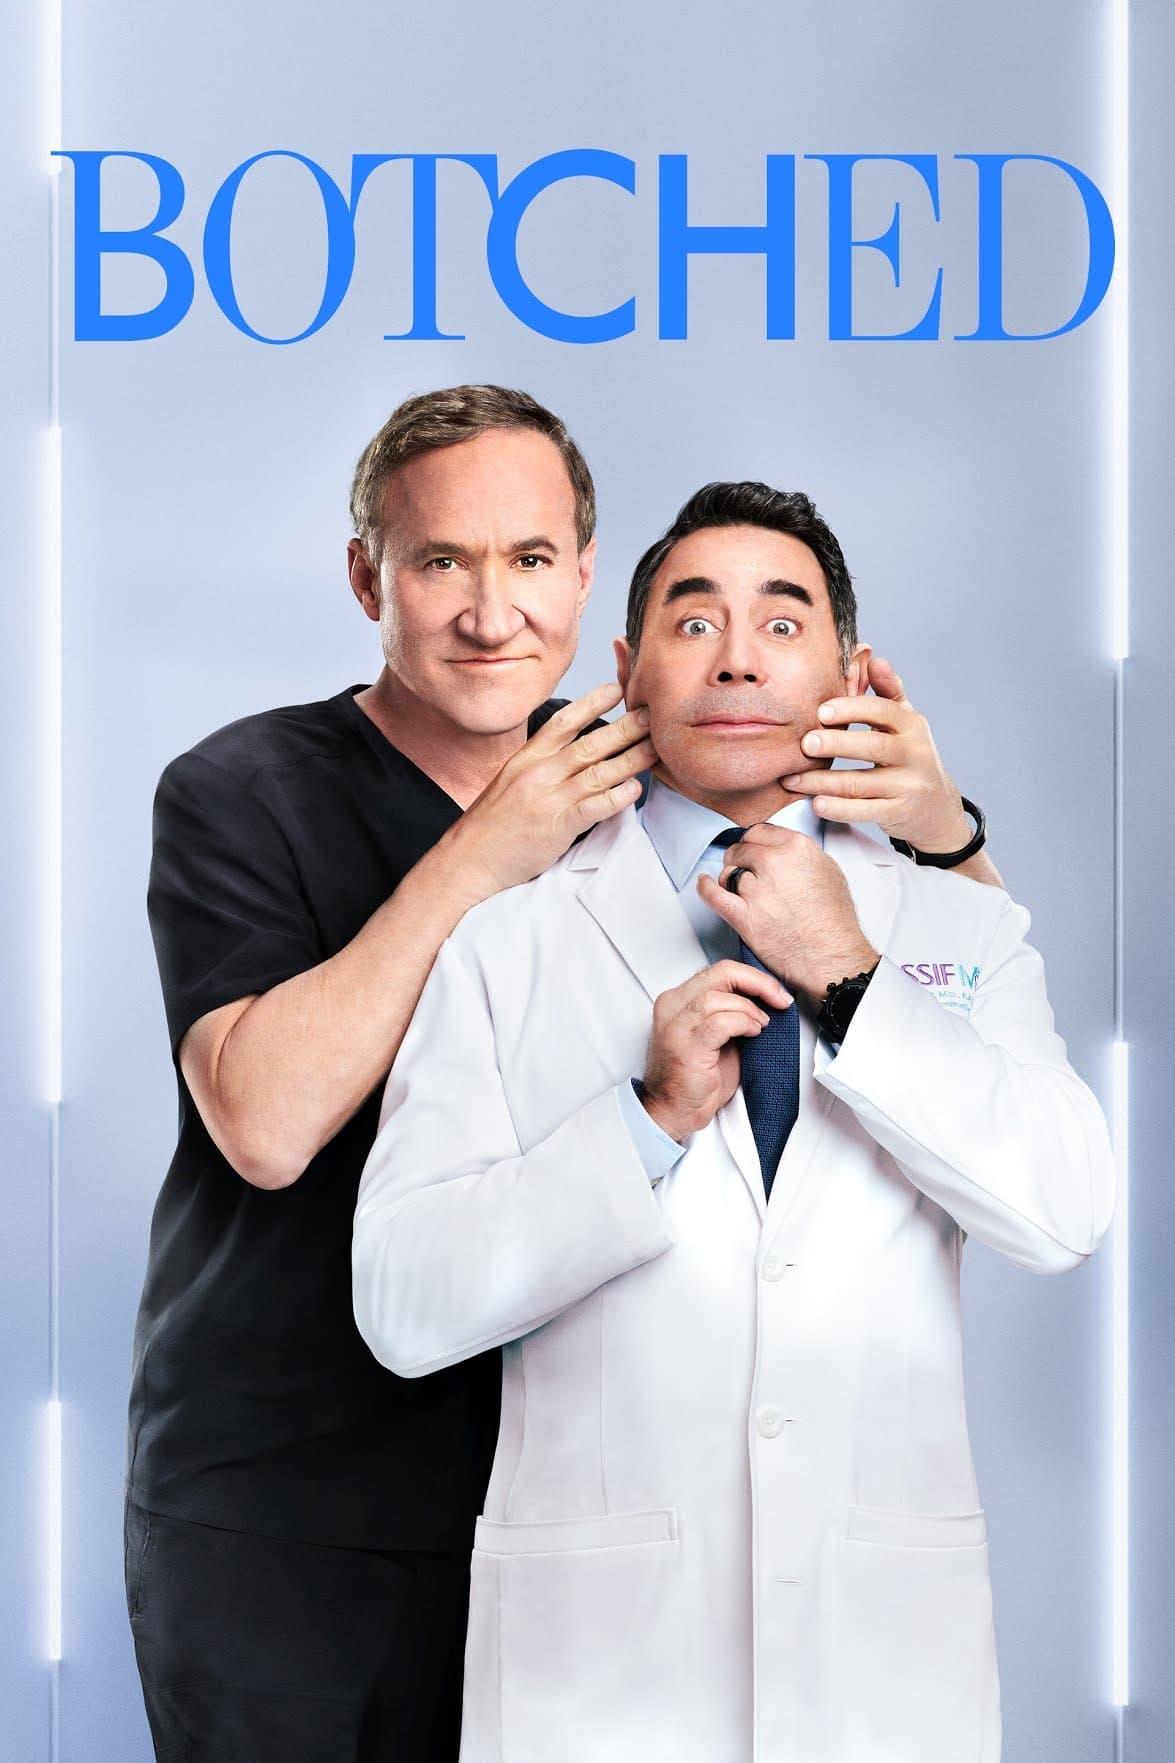 Botched poster